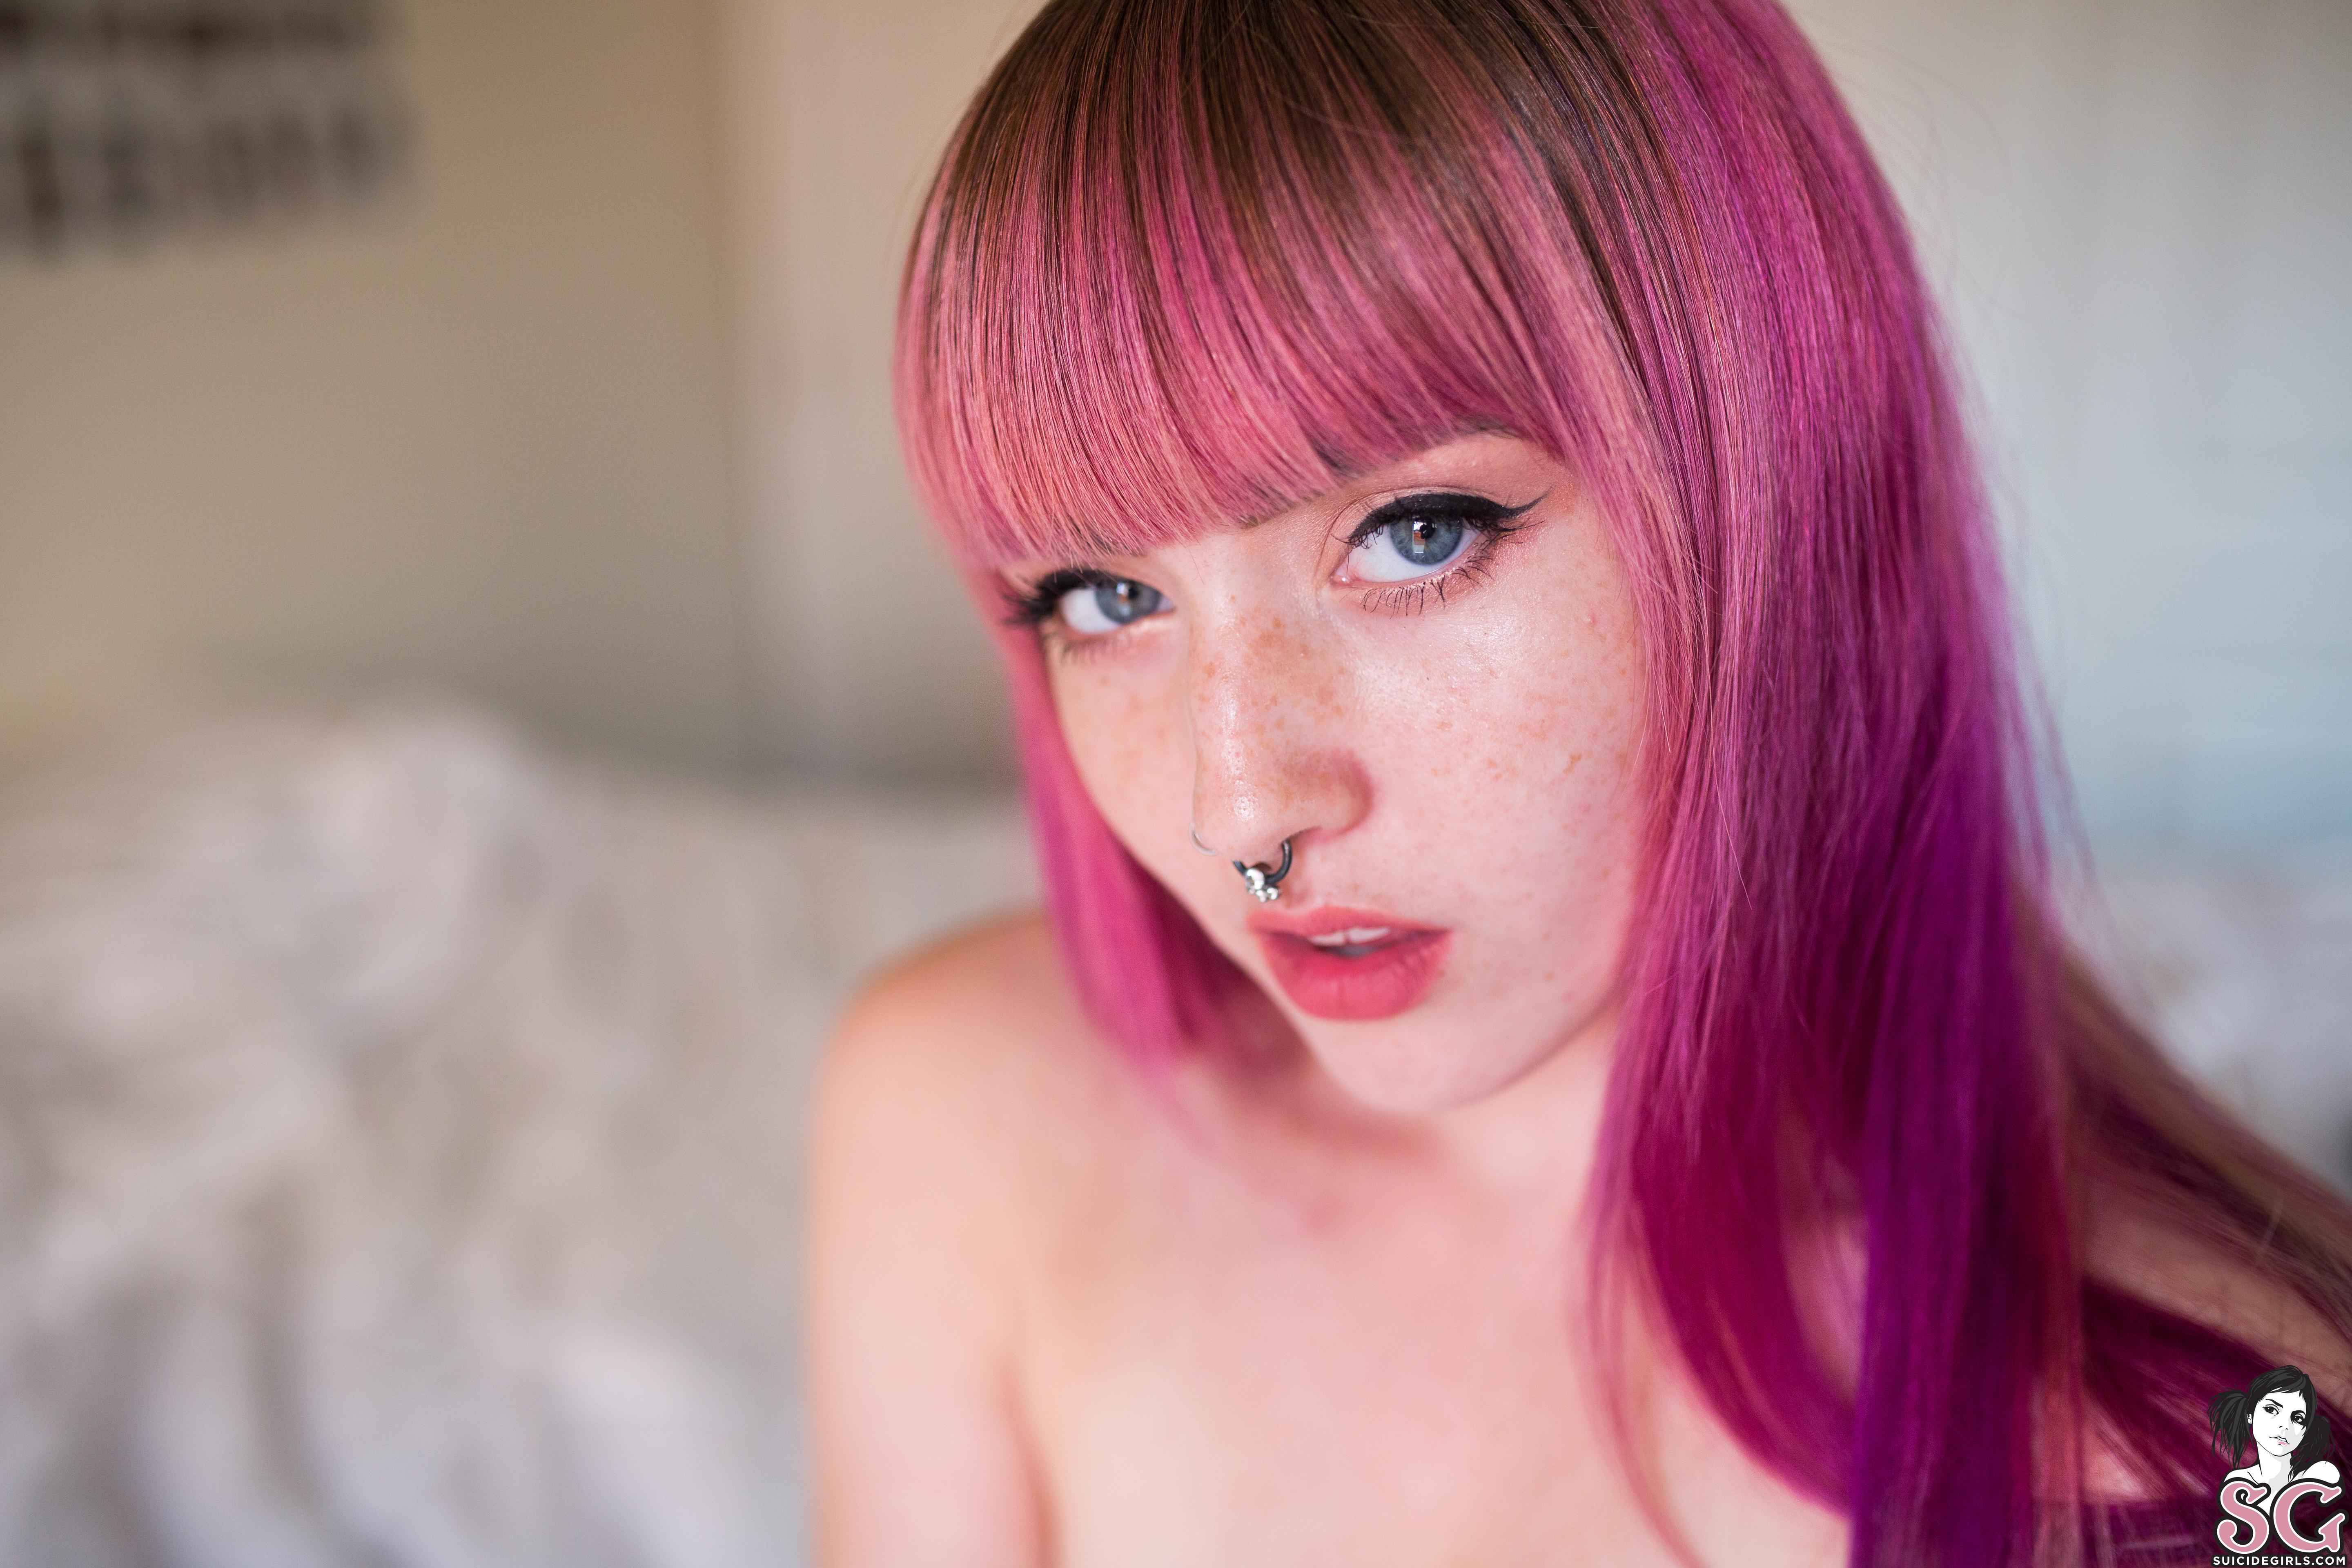 Dyed Hair In Bed Cyg Suicide Nude Blue Eyes Model